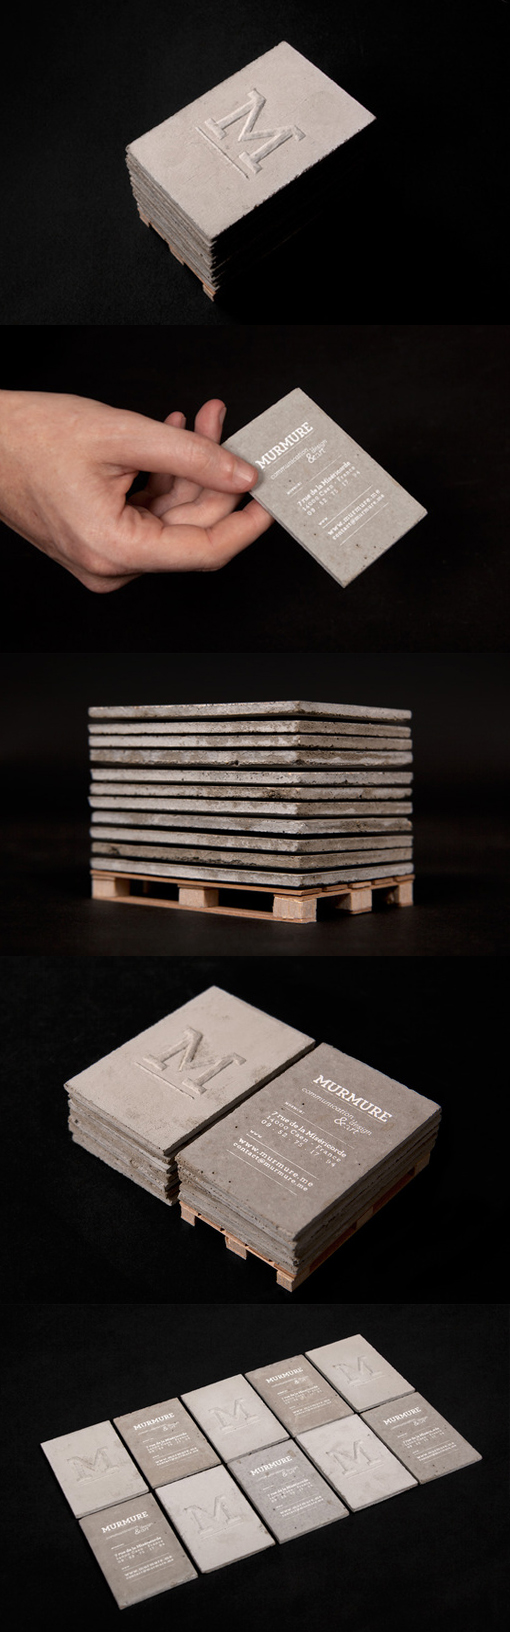 Creative Use Of Materials - A Concrete Business Card